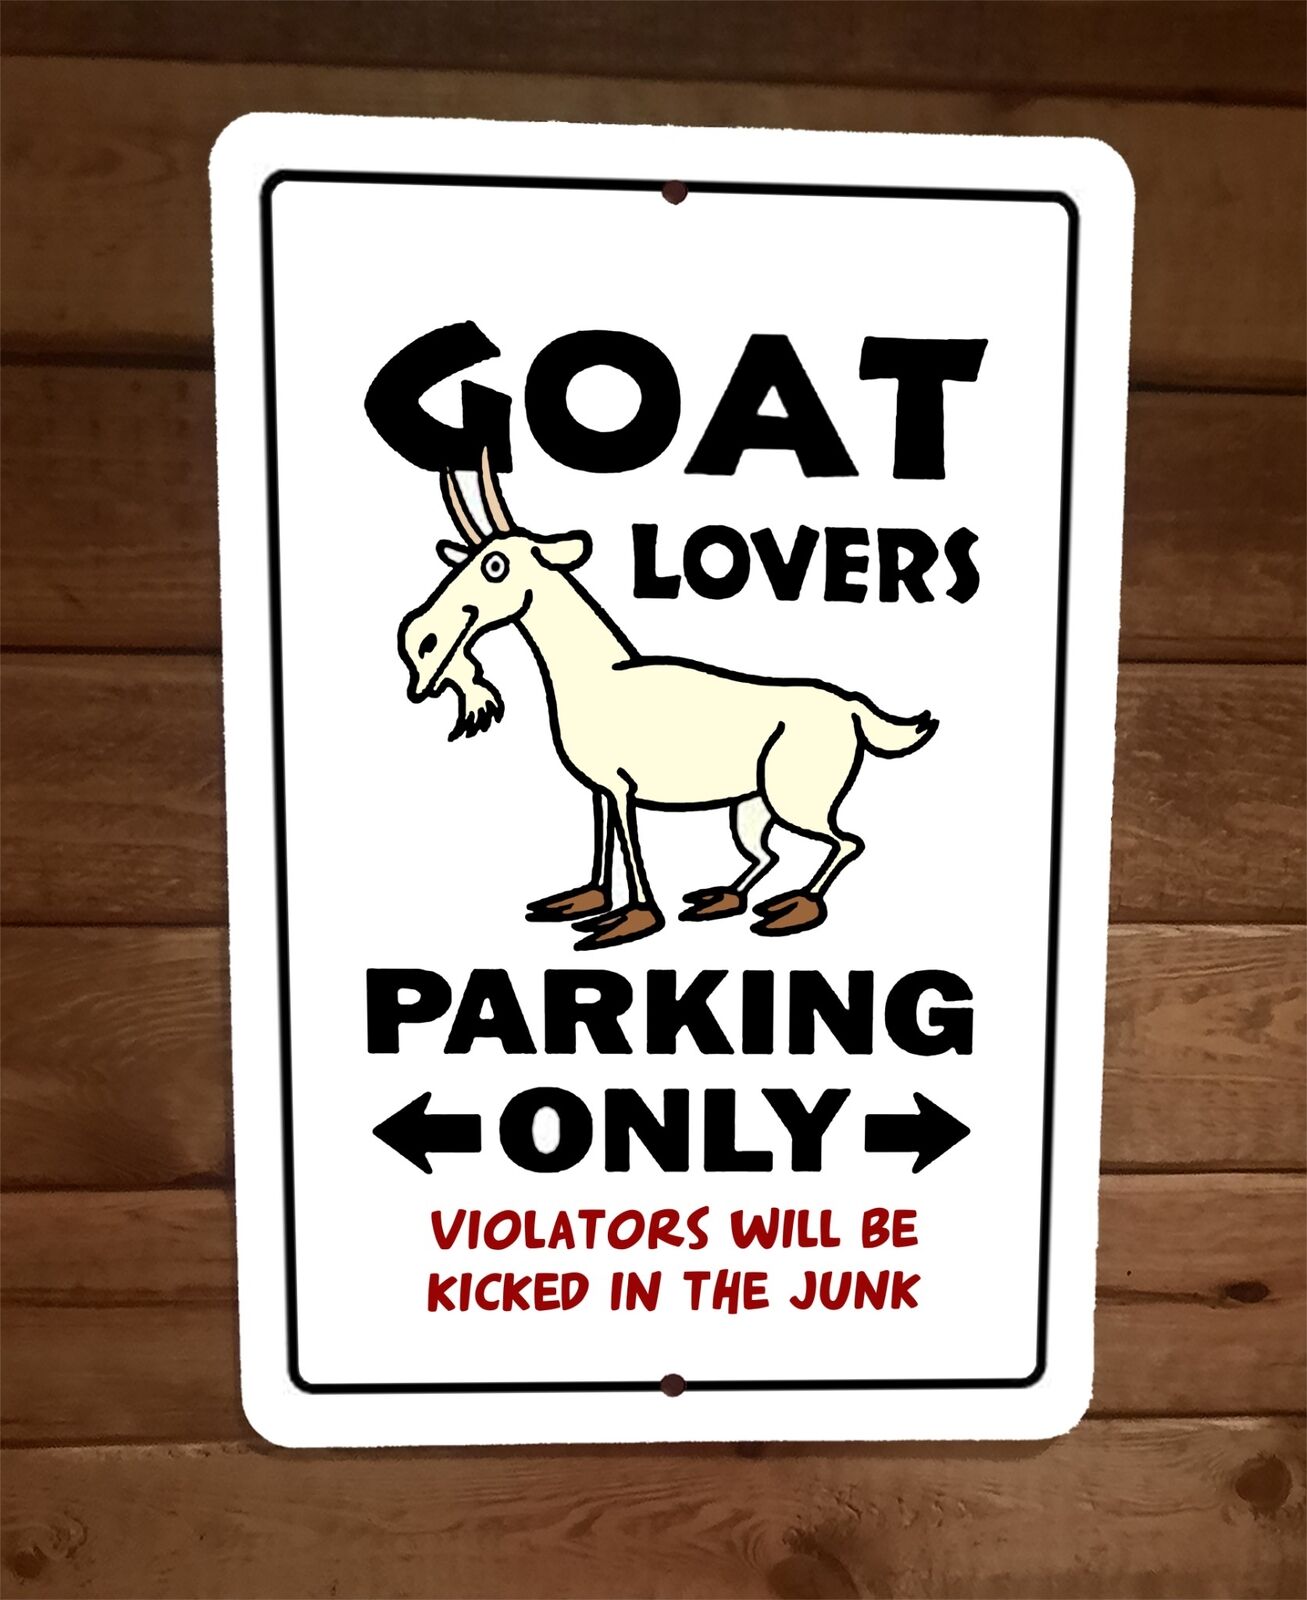 Goat Lovers Parking Only 8x12 Metal Wall Humorous Animal Sign